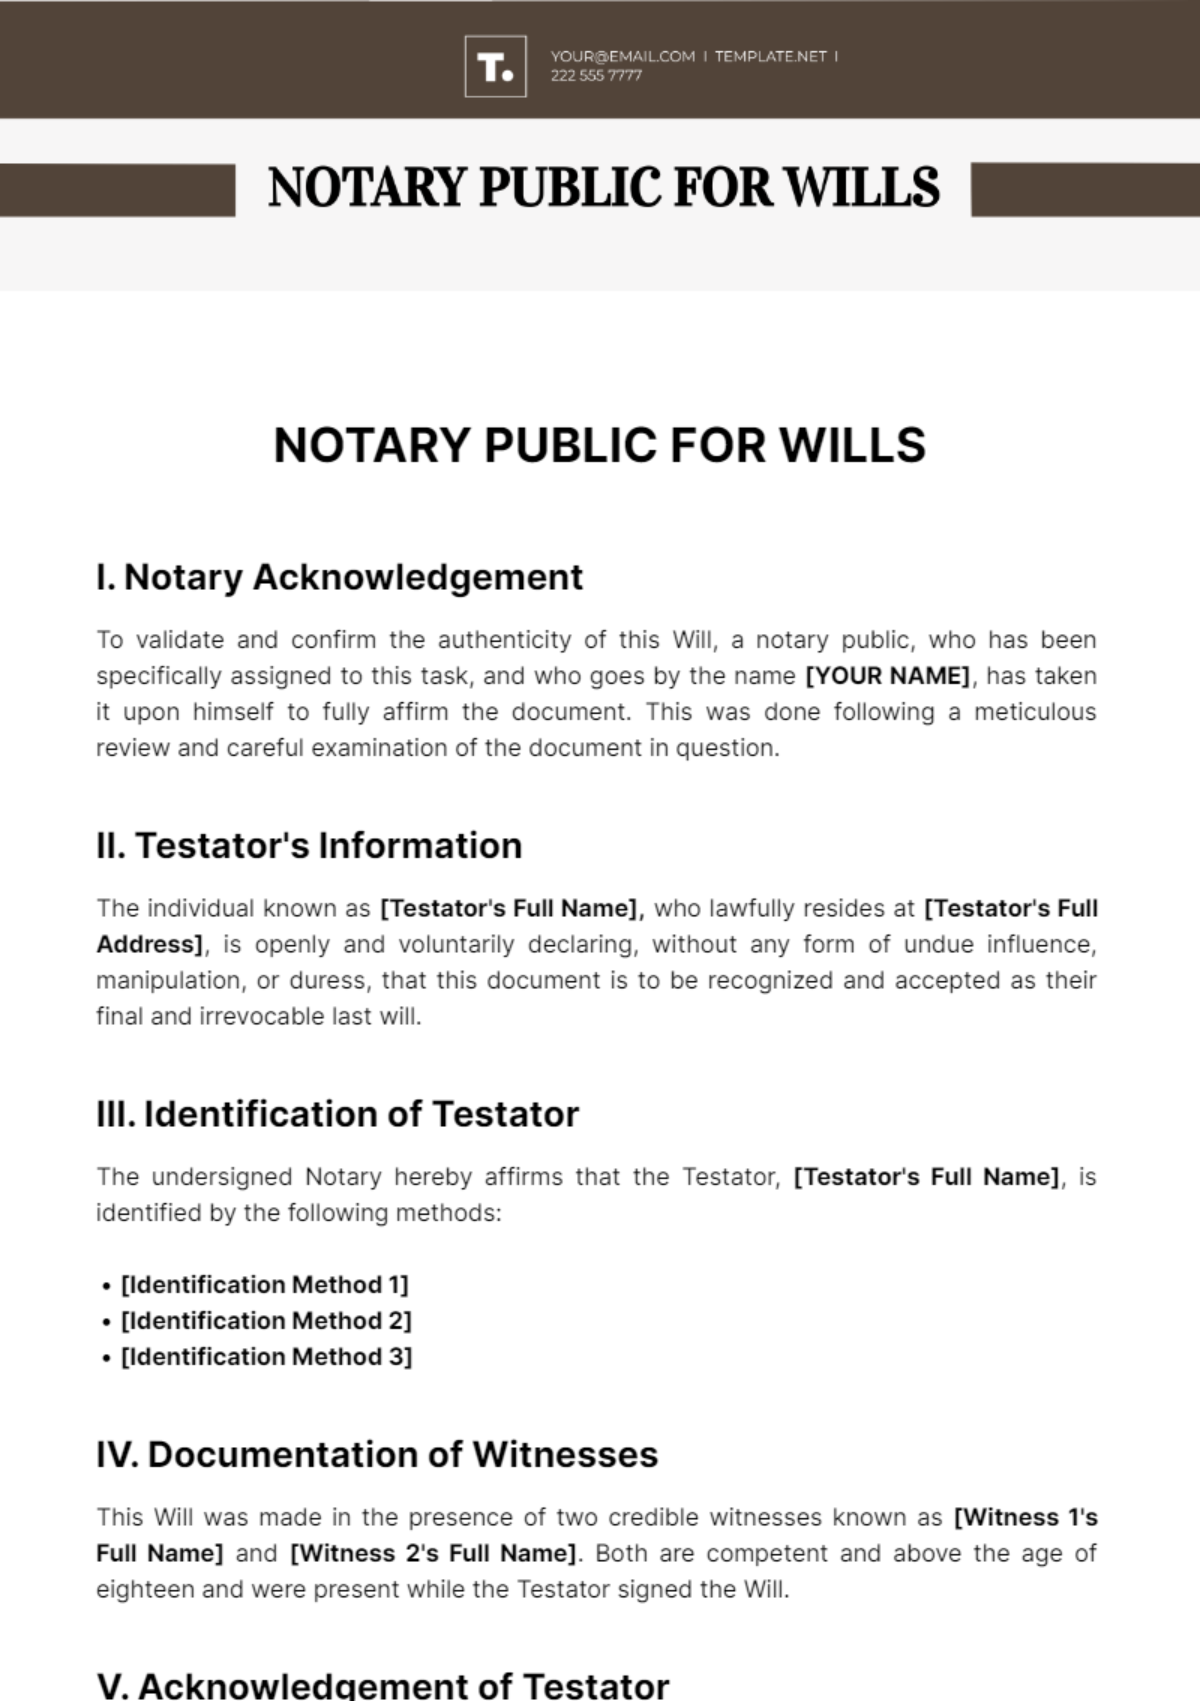 Notary Public For Wills Template